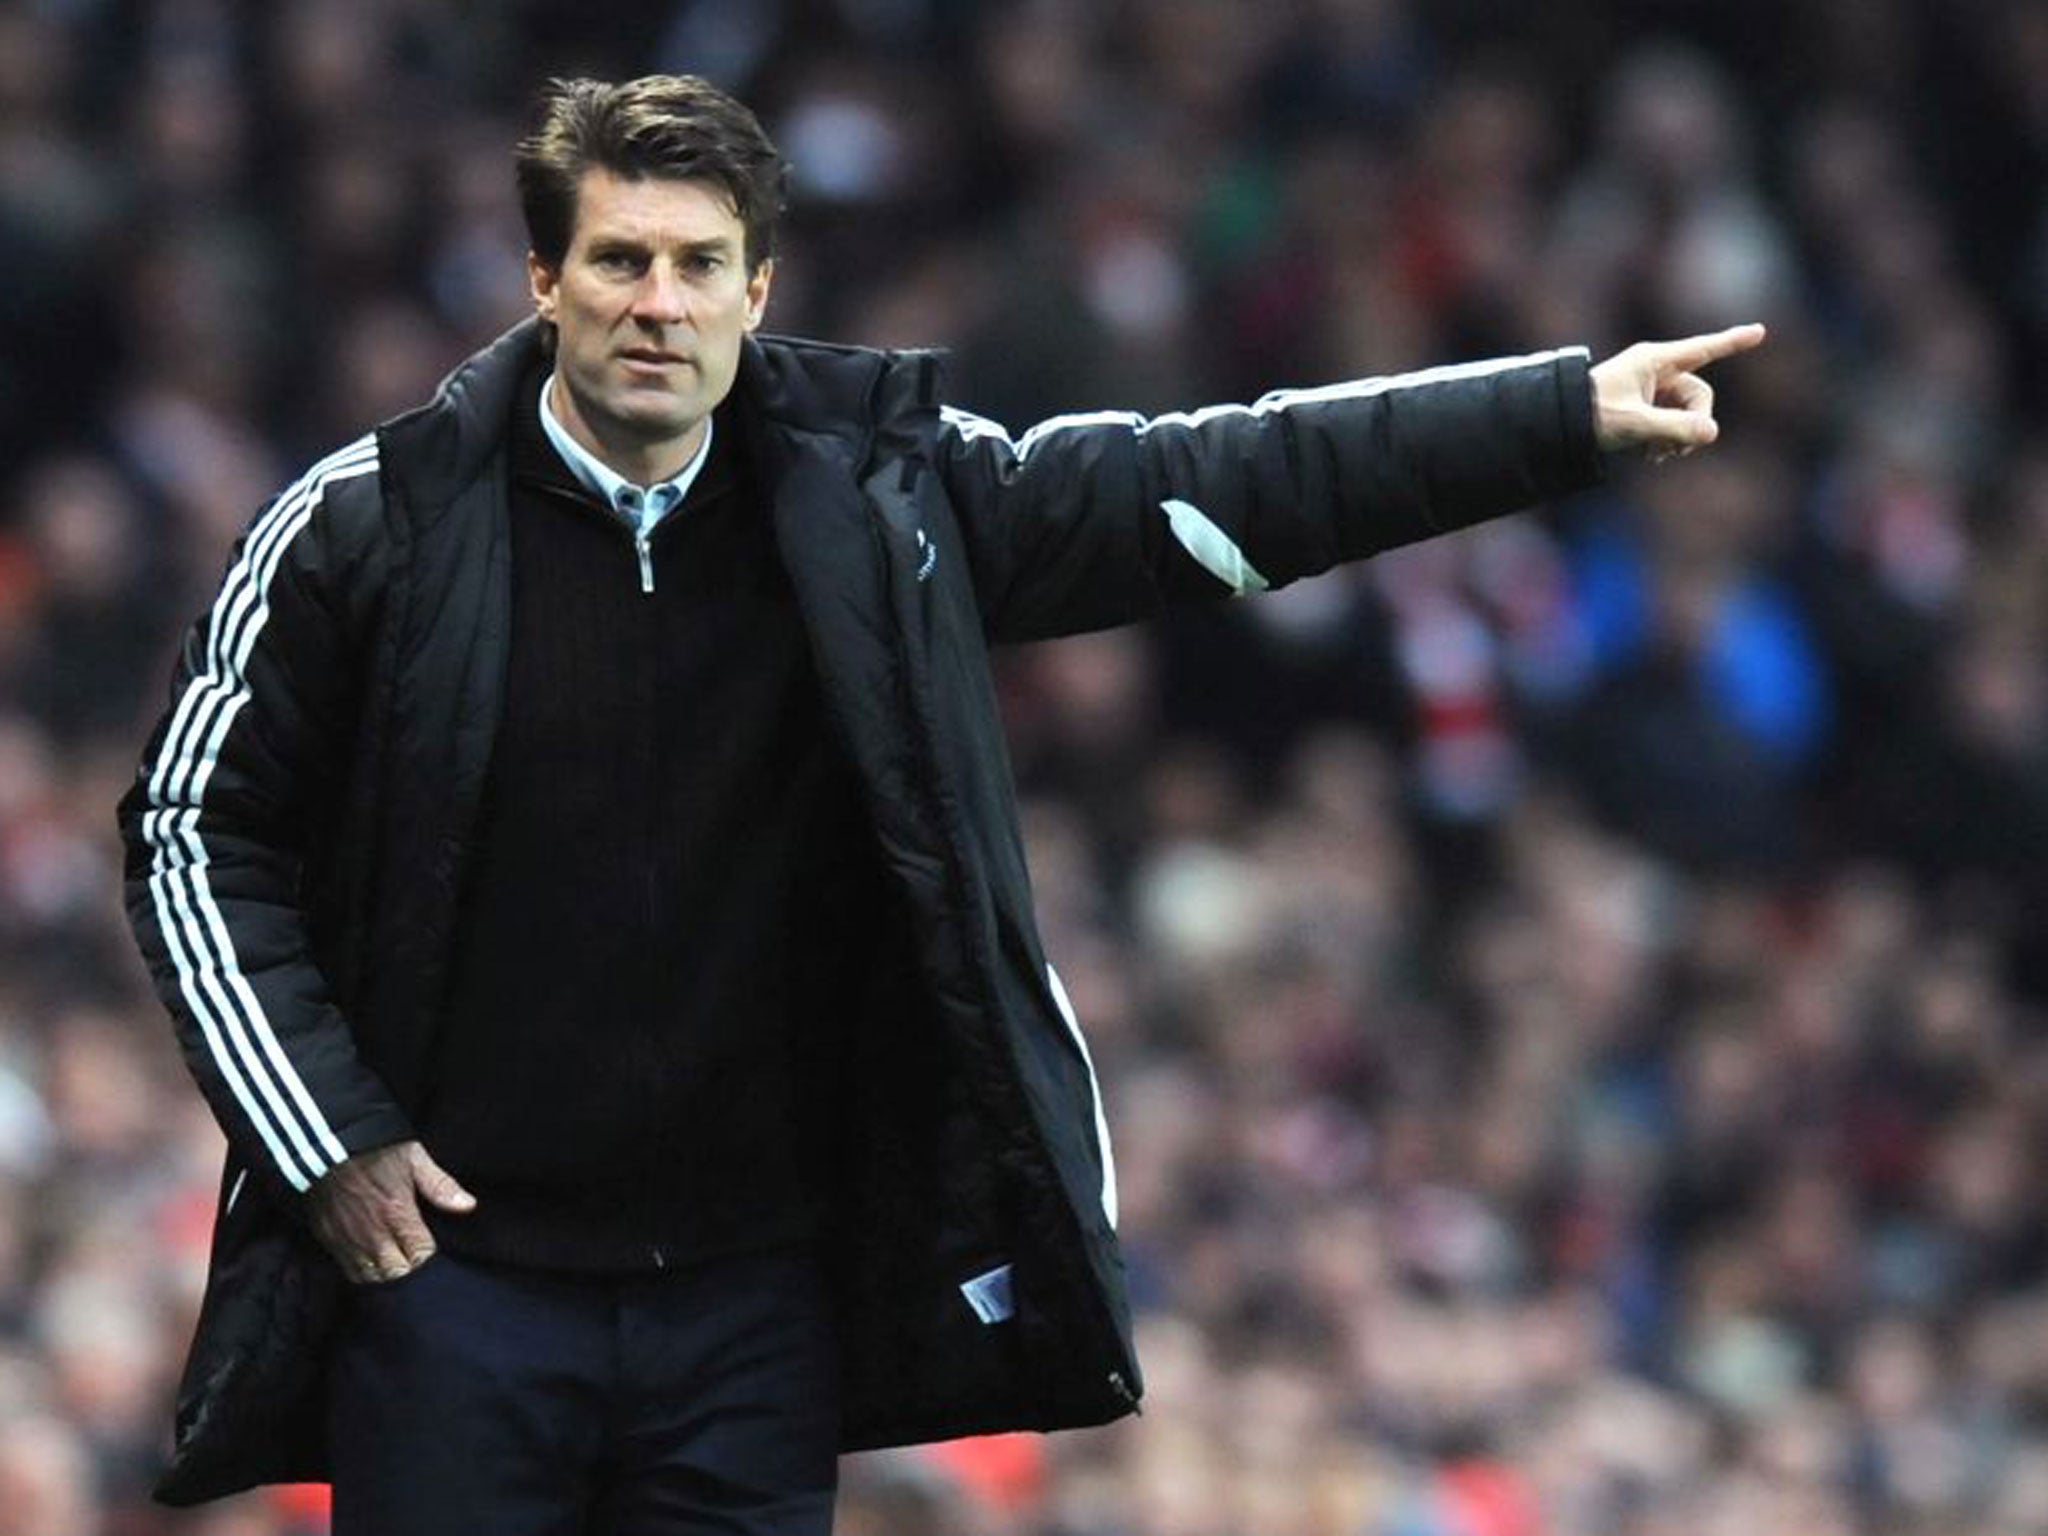 Forget the ballboy farce, the Swansea manager Michael Laudrup deserves the headlines for beating Chelsea and taking his team to the Capital One Cup final at Wembley